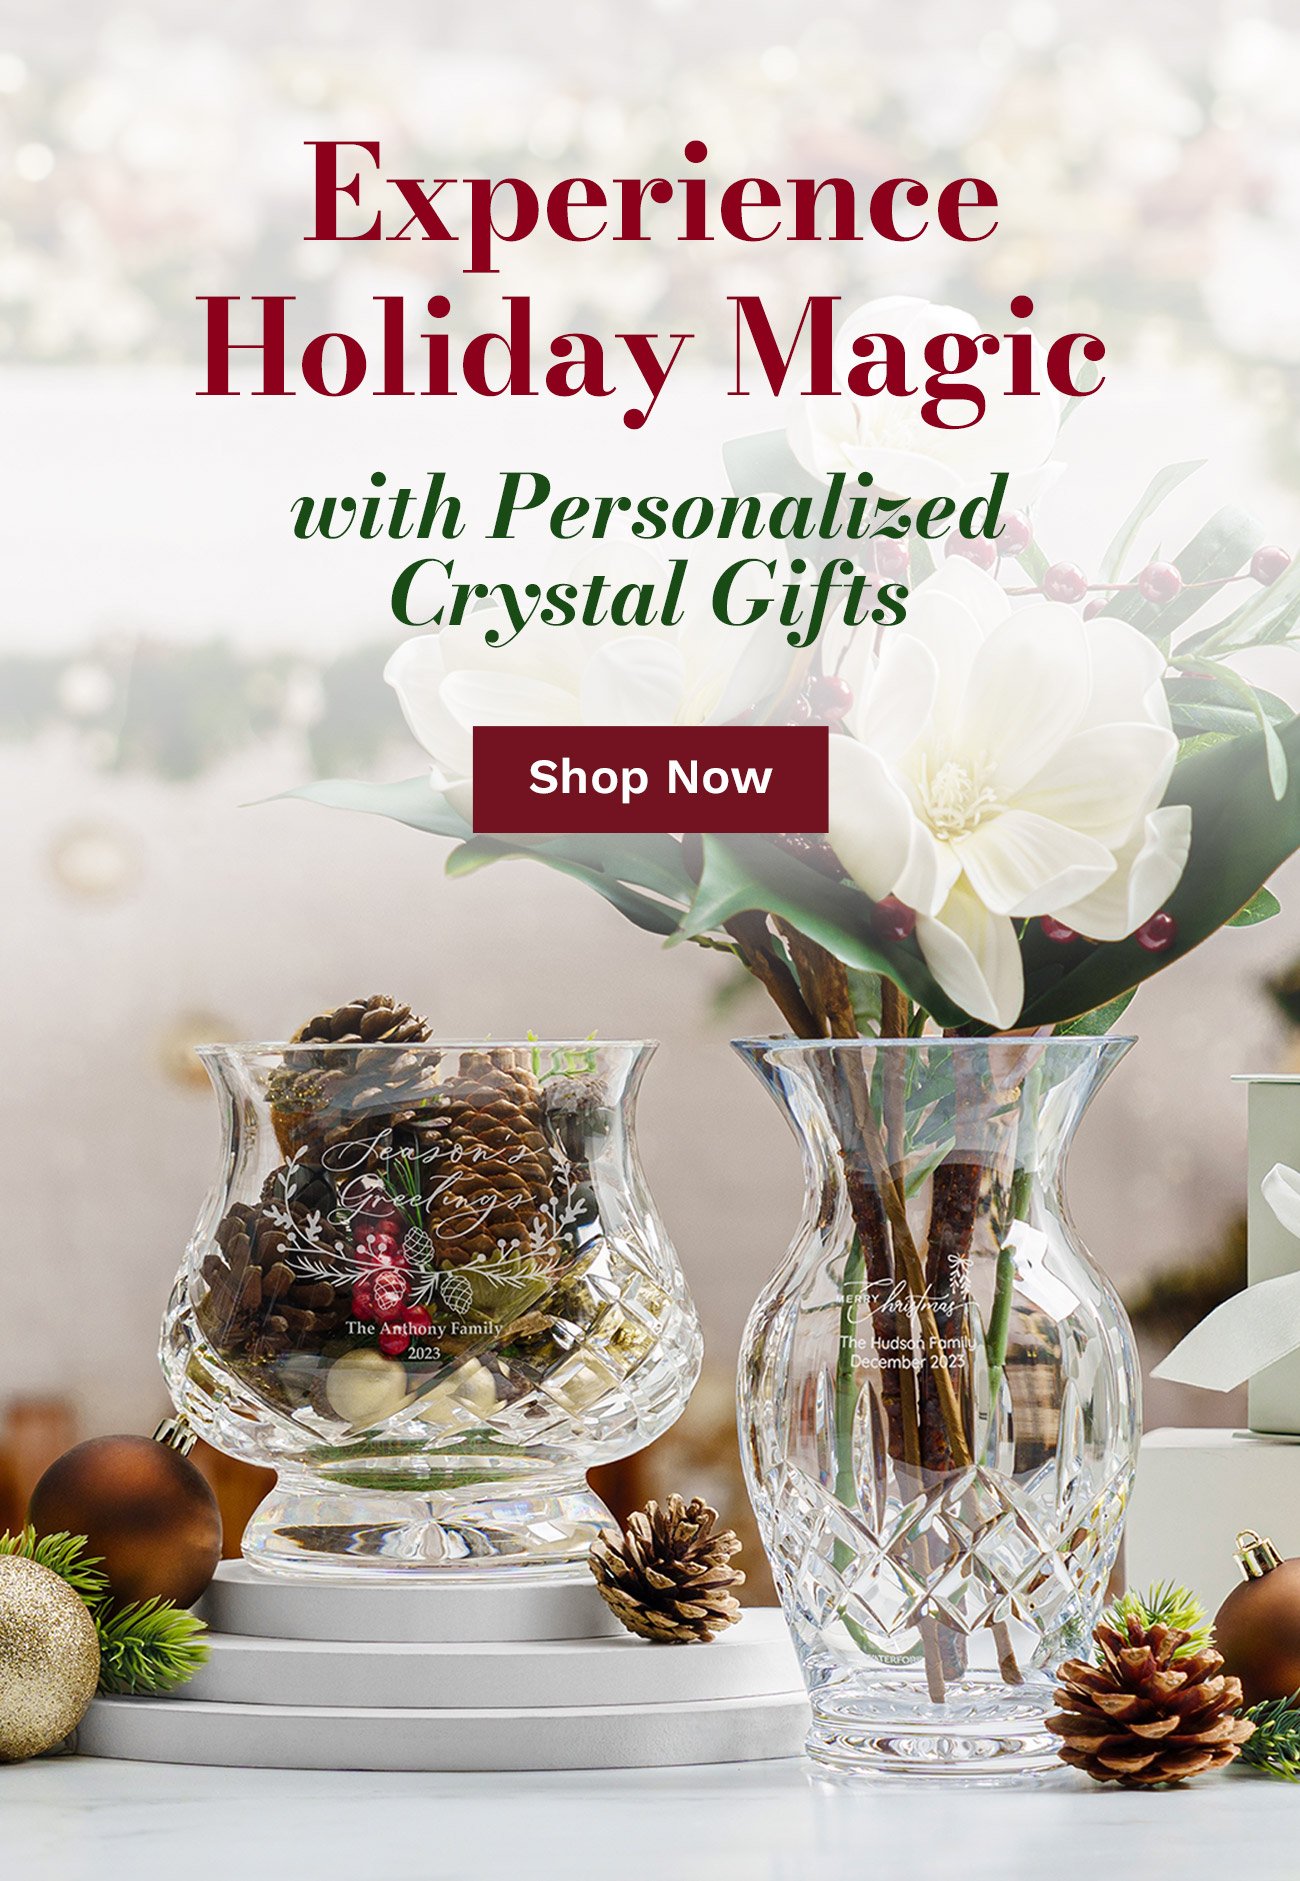 Experience Holiday Magic with Personalized Crystal Gifts. Shop Now.